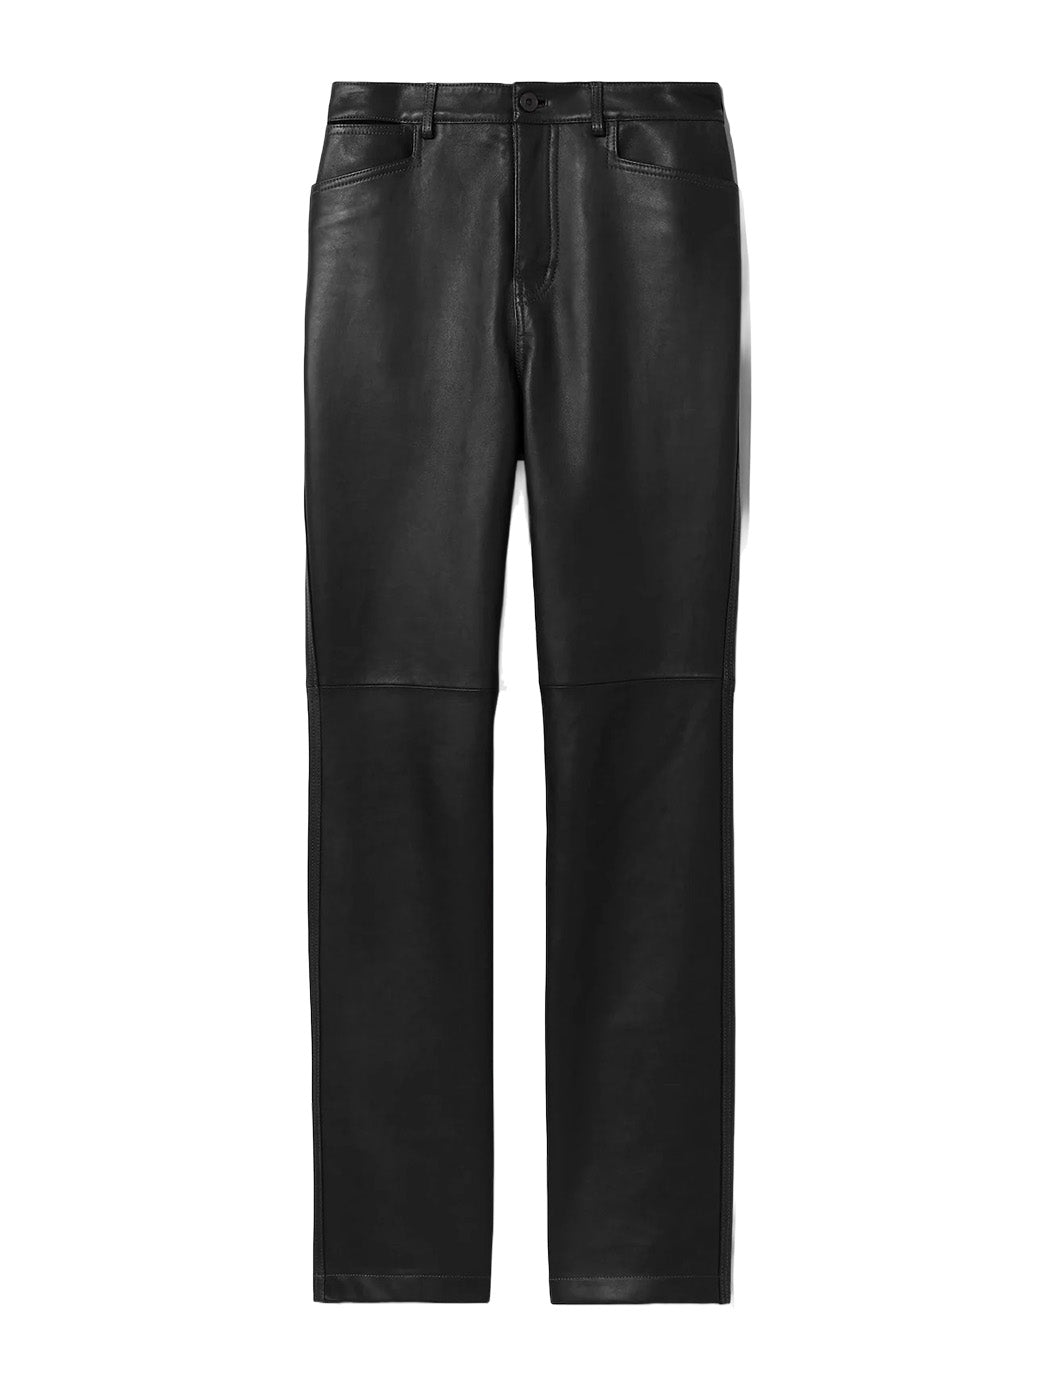 Leather Straight Leg Pants in Black